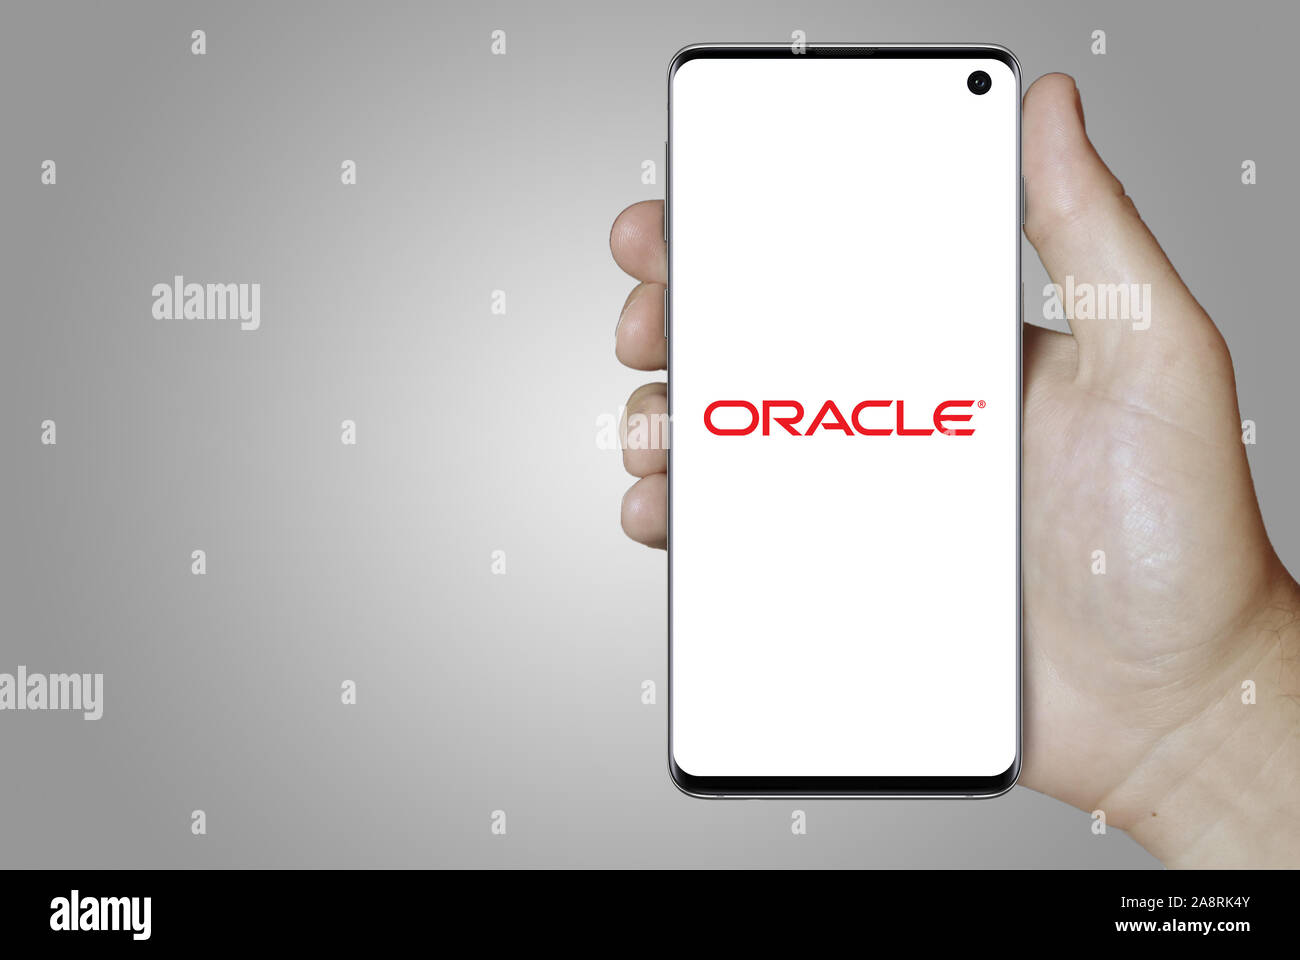 Logo of public company Oracle Corp. displayed on a smartphone. Grey background. Credit: PIXDUCE Stock Photo